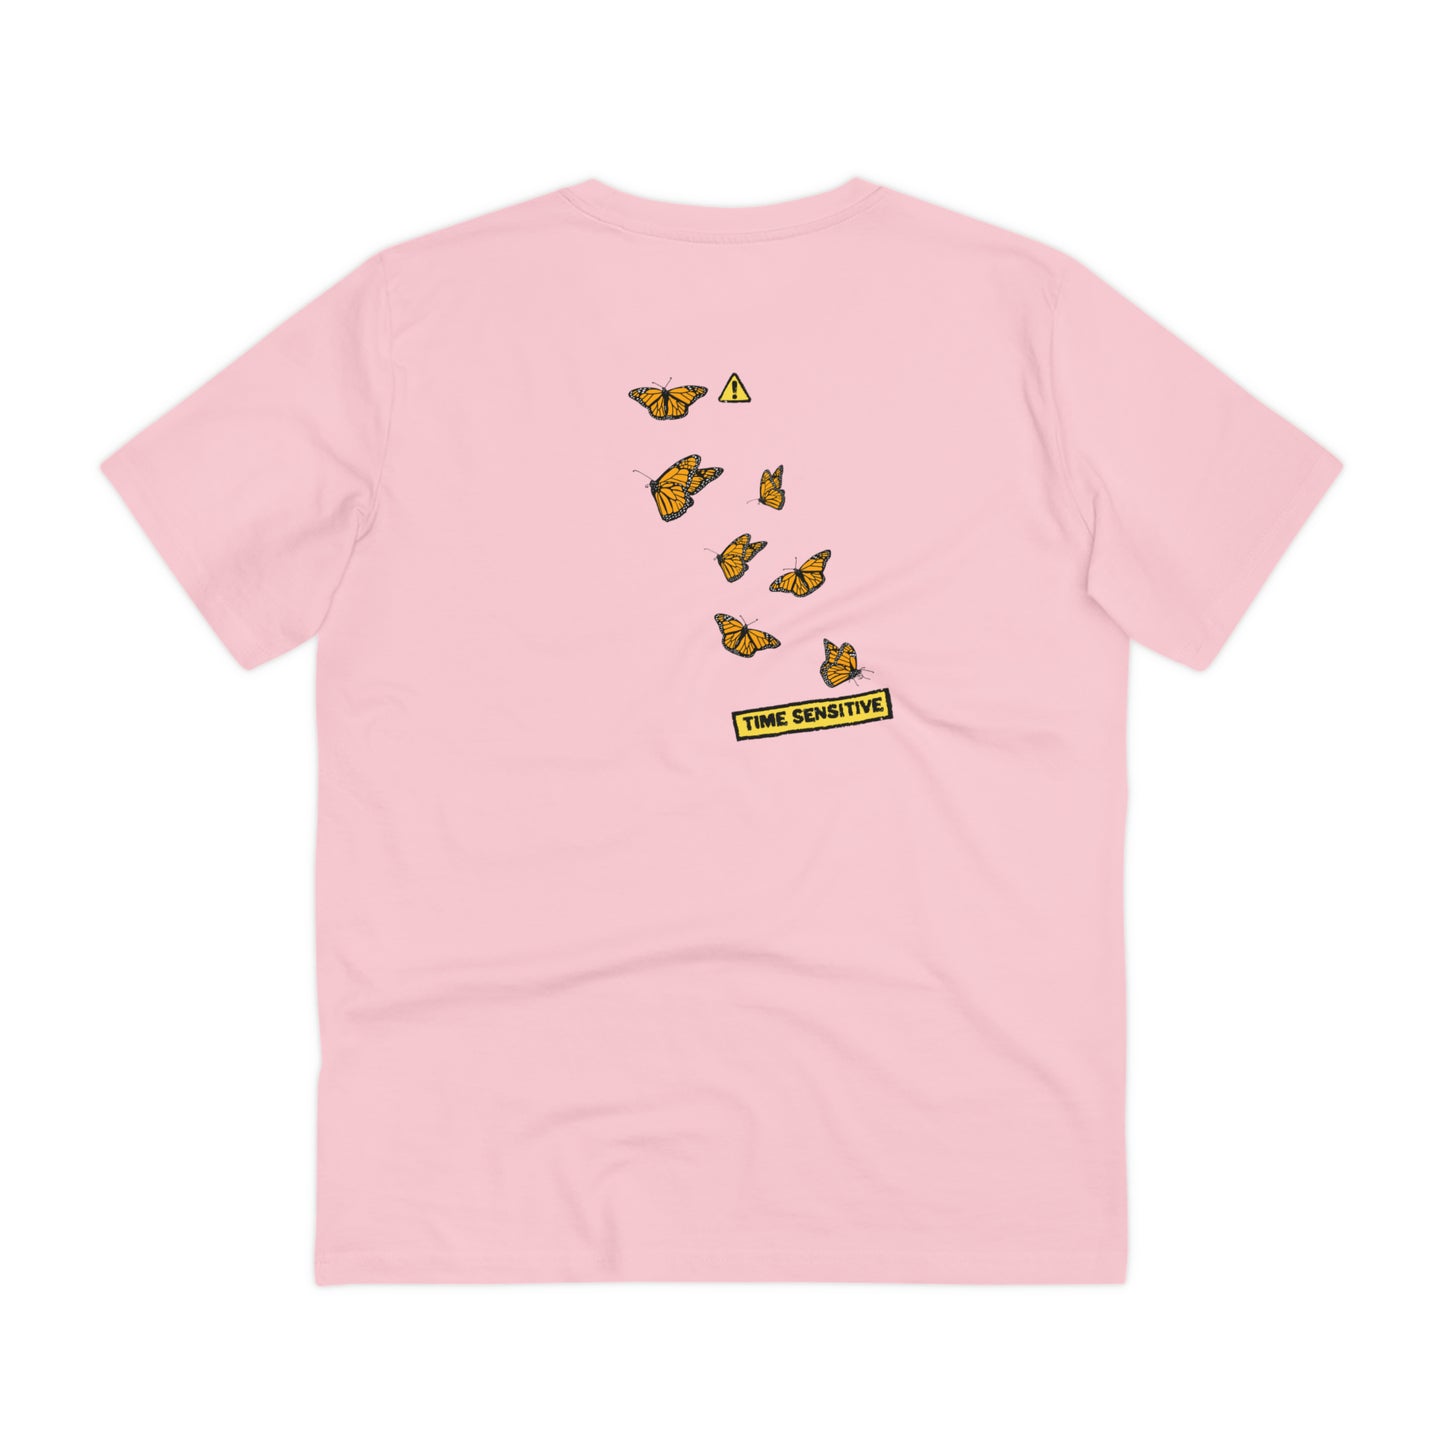 The back of The Monarch Butterfly T Shirt, Cotton Pink, Cluster of Monarch Butterflies artwork. Butterfly Shirt, Butterfly T Shirt